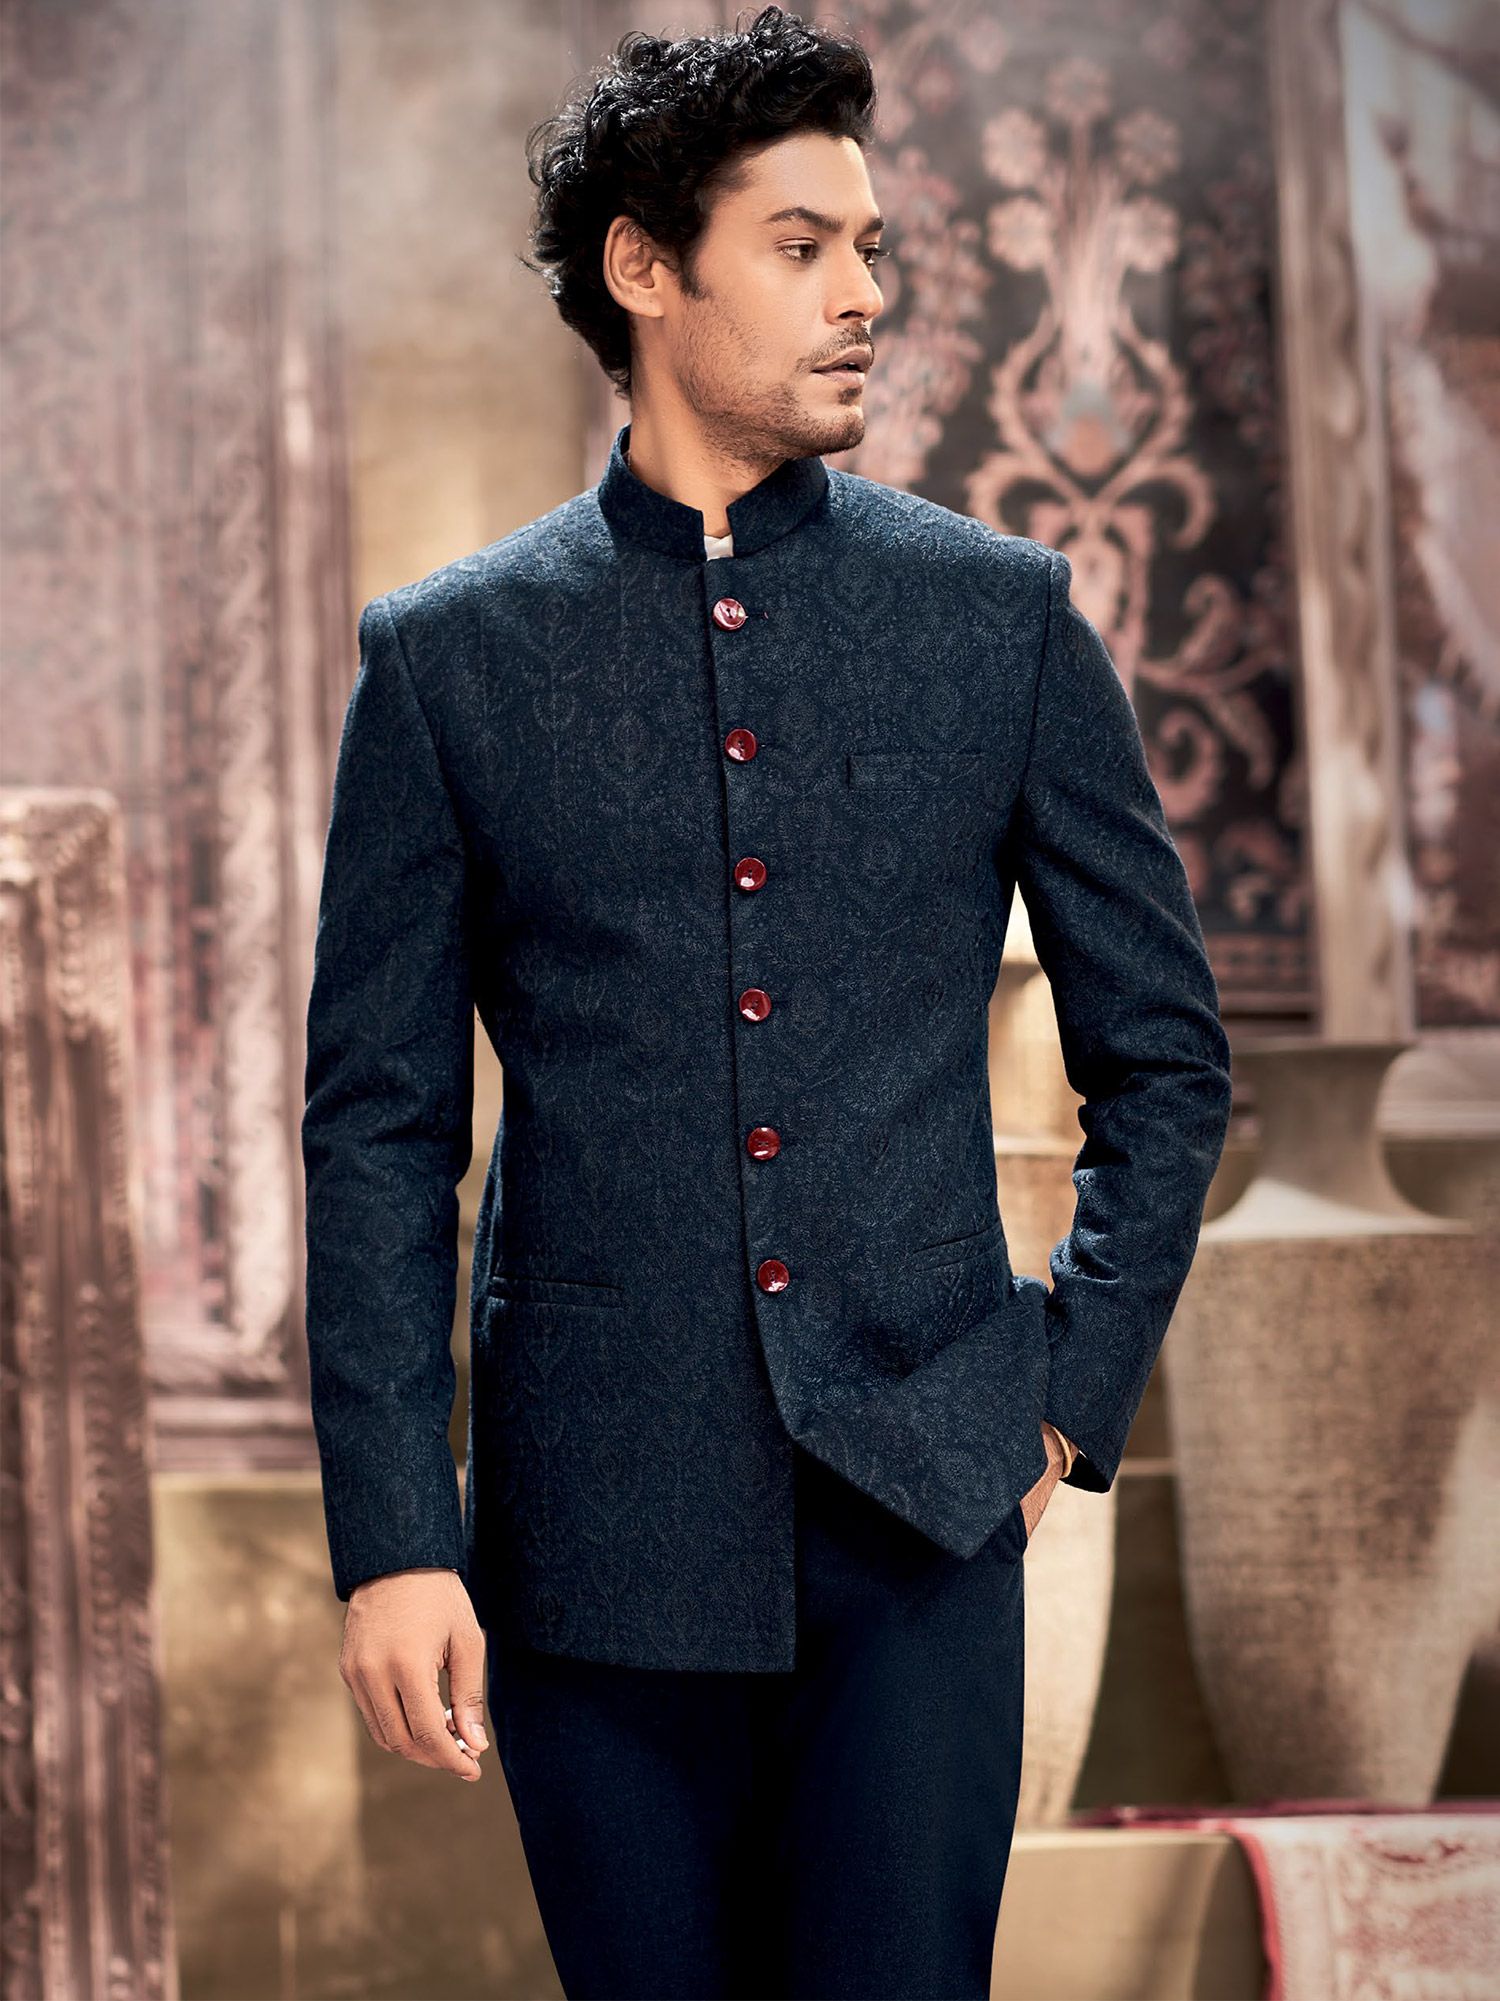 mens indian wedding outfit – Bagtesh Fashion